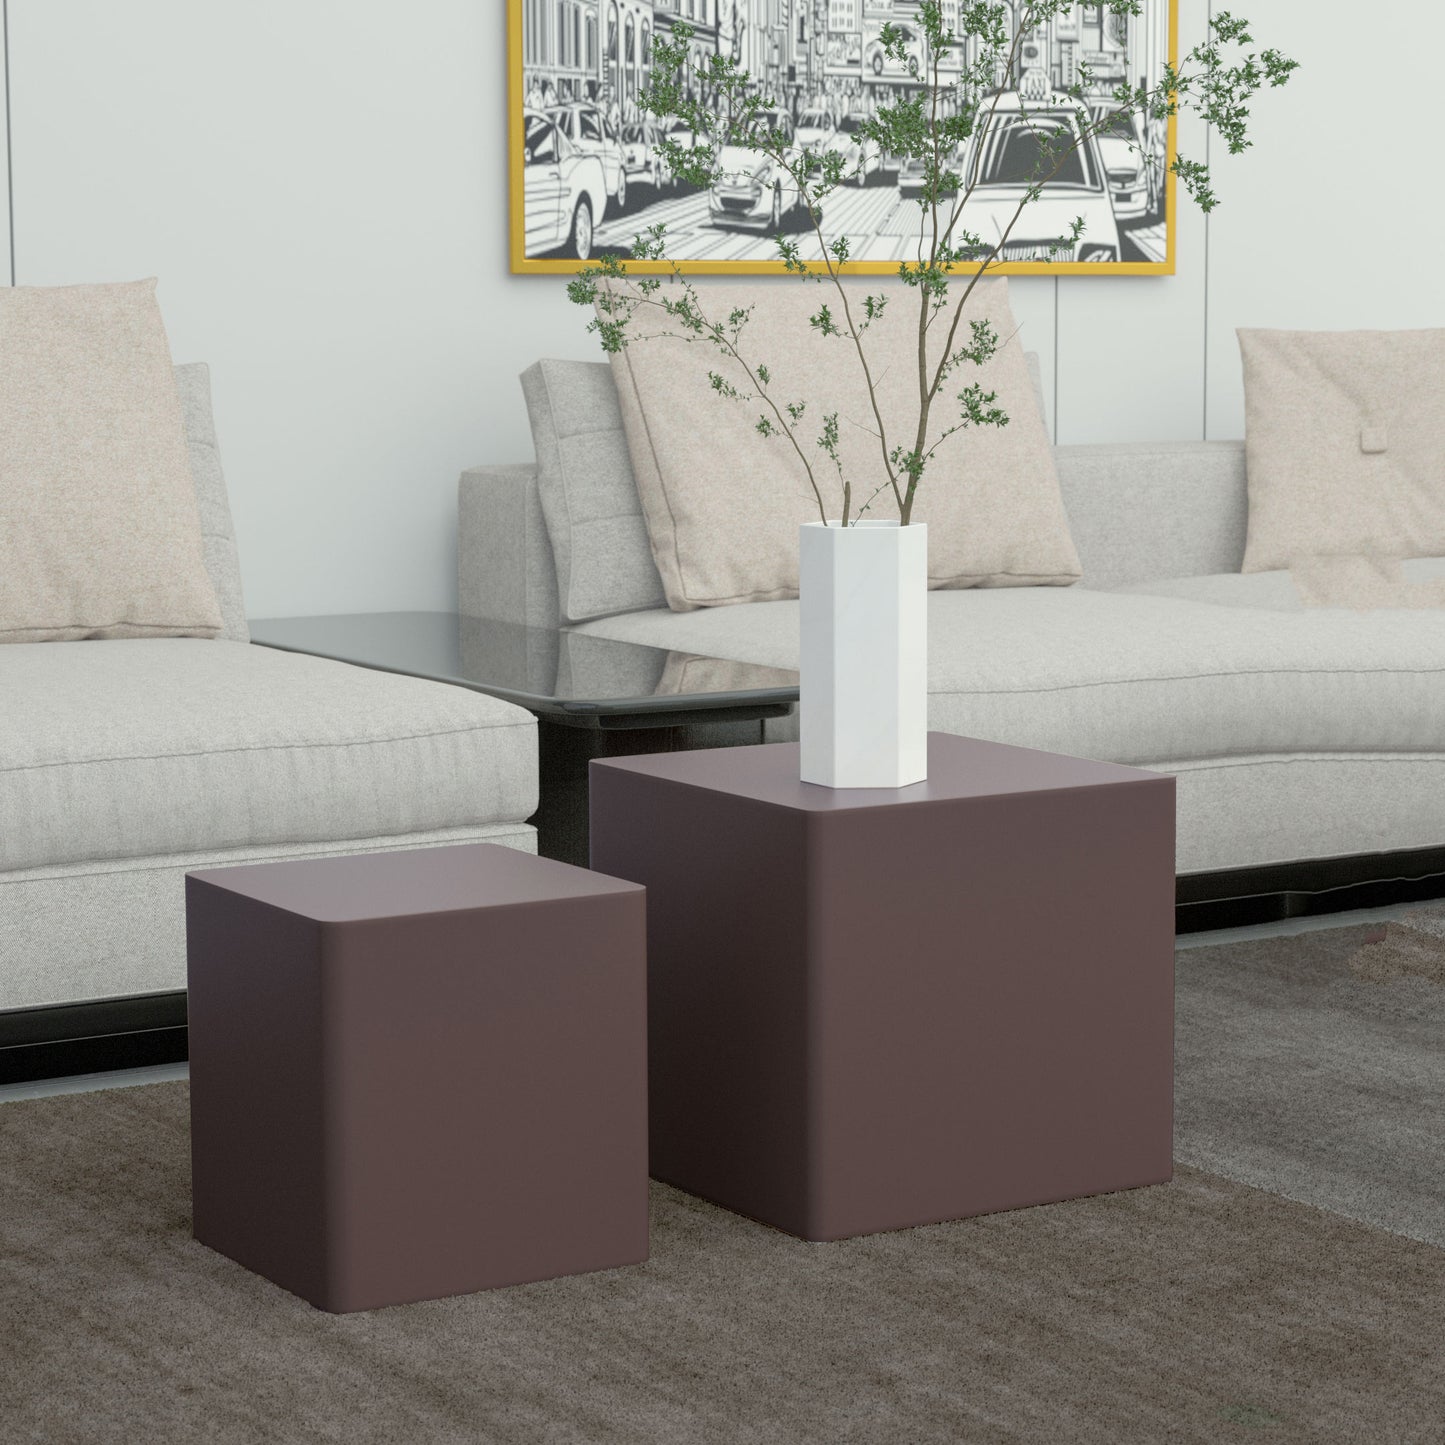 MDF Nesting Table Set of 2 - Chocolate Brown, Modern Design, Space-saving Furniture, Durable Material, Stylish Home Decor